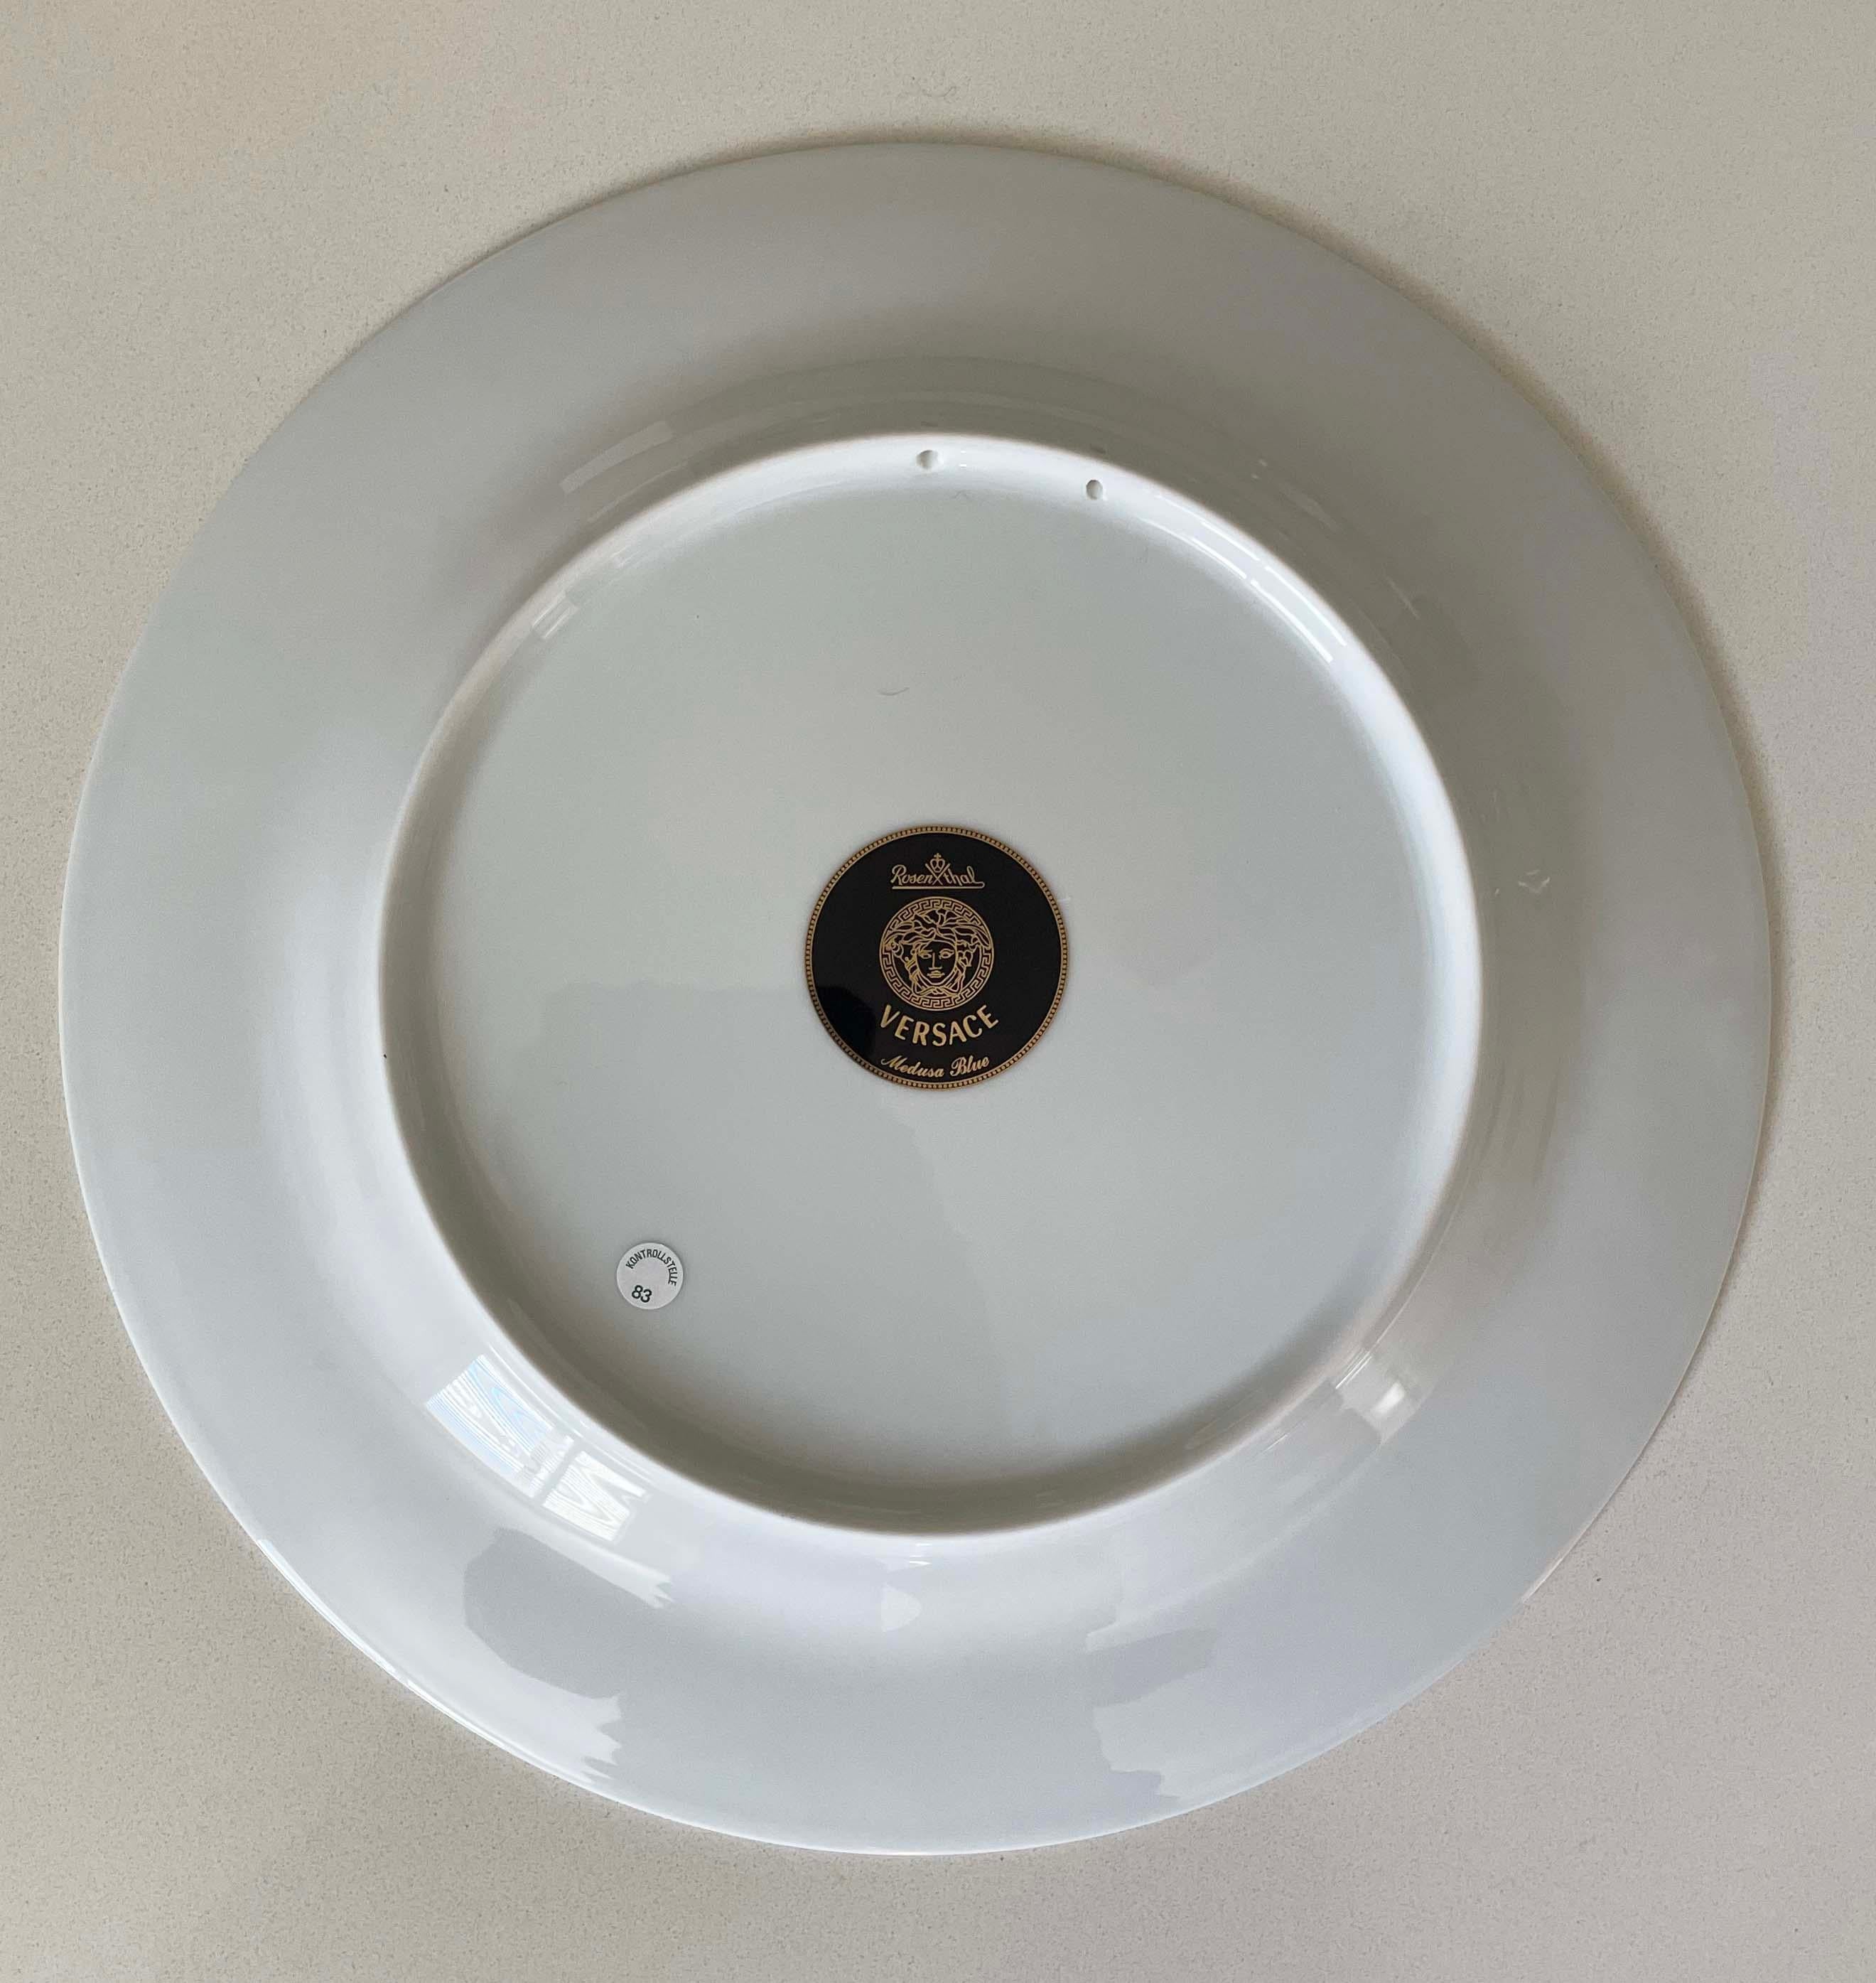 An Red Versace porcelain Medusa display plate manufactured by Rosenthal, Germany.  

Decorated in gold, red and black to create a high quality accessory,  in the original Versace gift box.

Rosenthal GmbH is a German manufacturer of porcelain